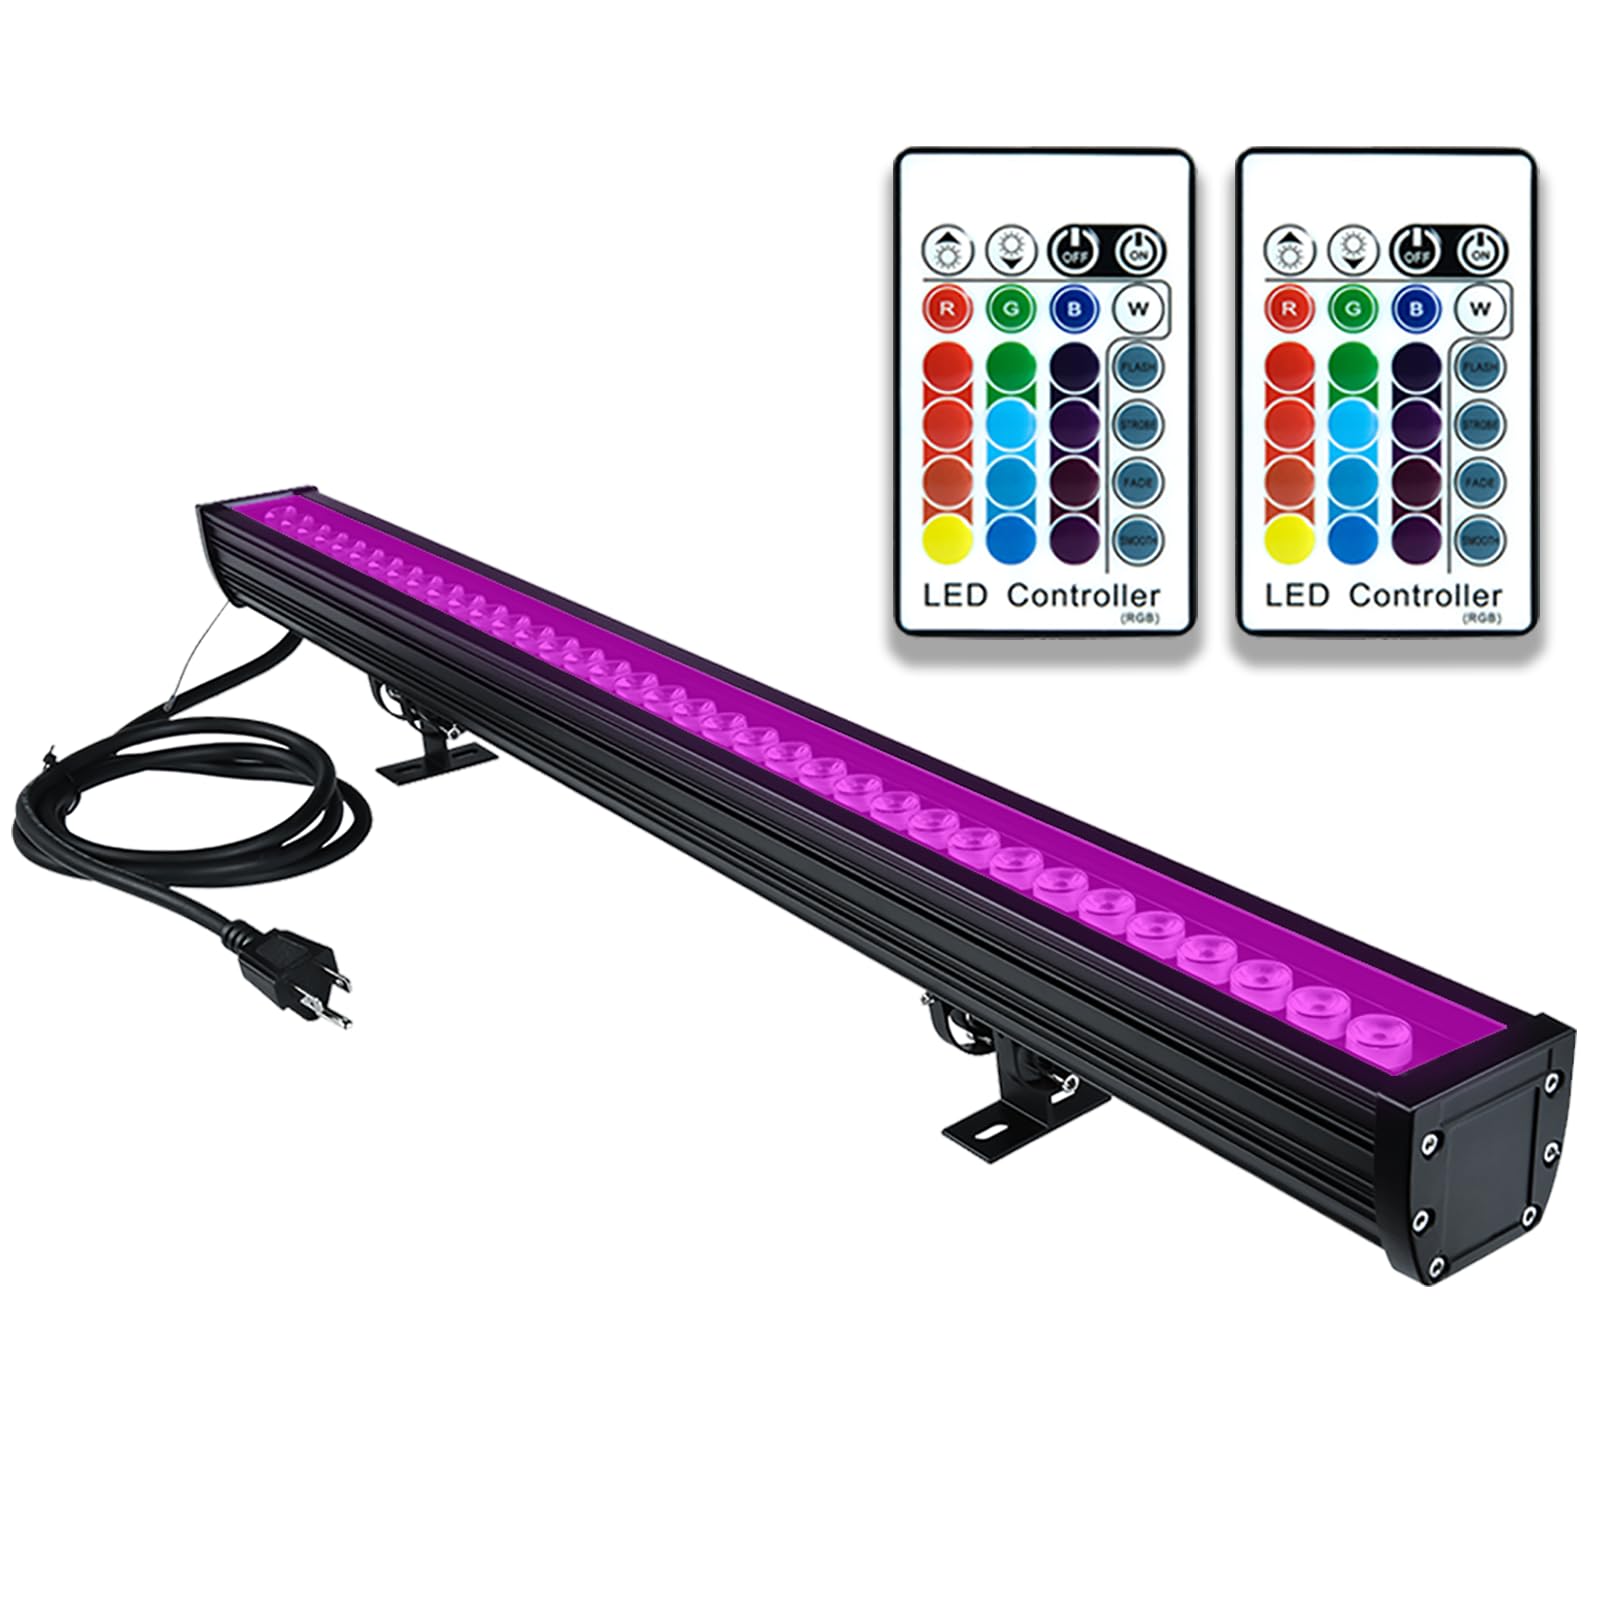 Wall Washer LED Lights,108W RGBW Color Changing LED Strip Lights with RF Remote,120V, 3.2ft/40 "Linear RGB LED Lights Bar for Outdoor/Indoor Lighting Projects Carnival Party Stage Bar Decor